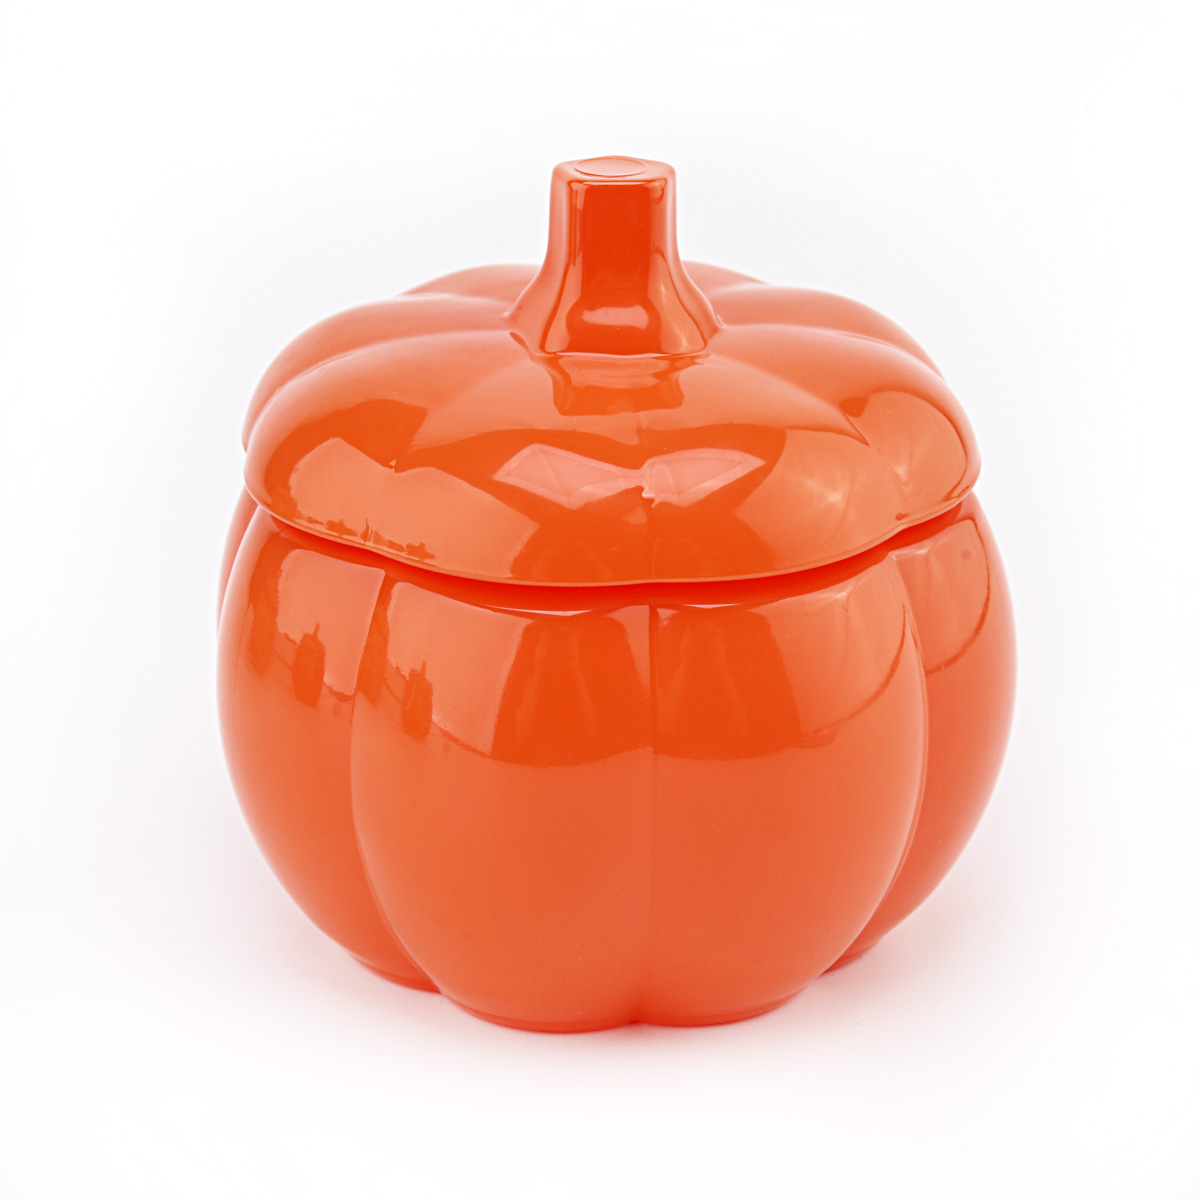 Halloween Orange Pumpkin Shaped Jar for Candle Glass Candy Jar with Lid